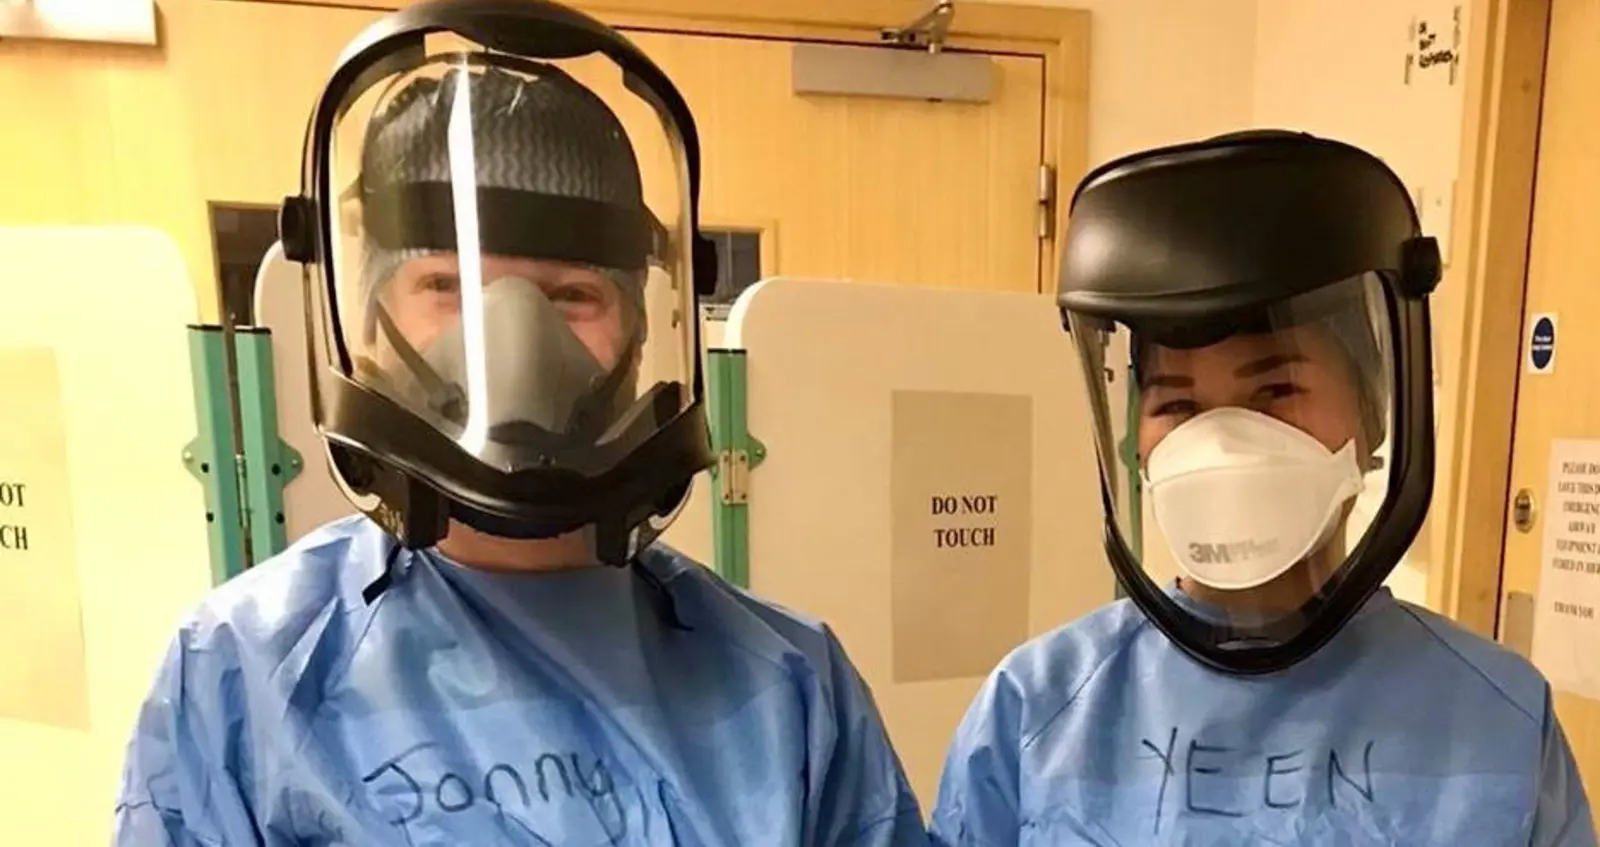 Apassara at work with a colleague in PPE